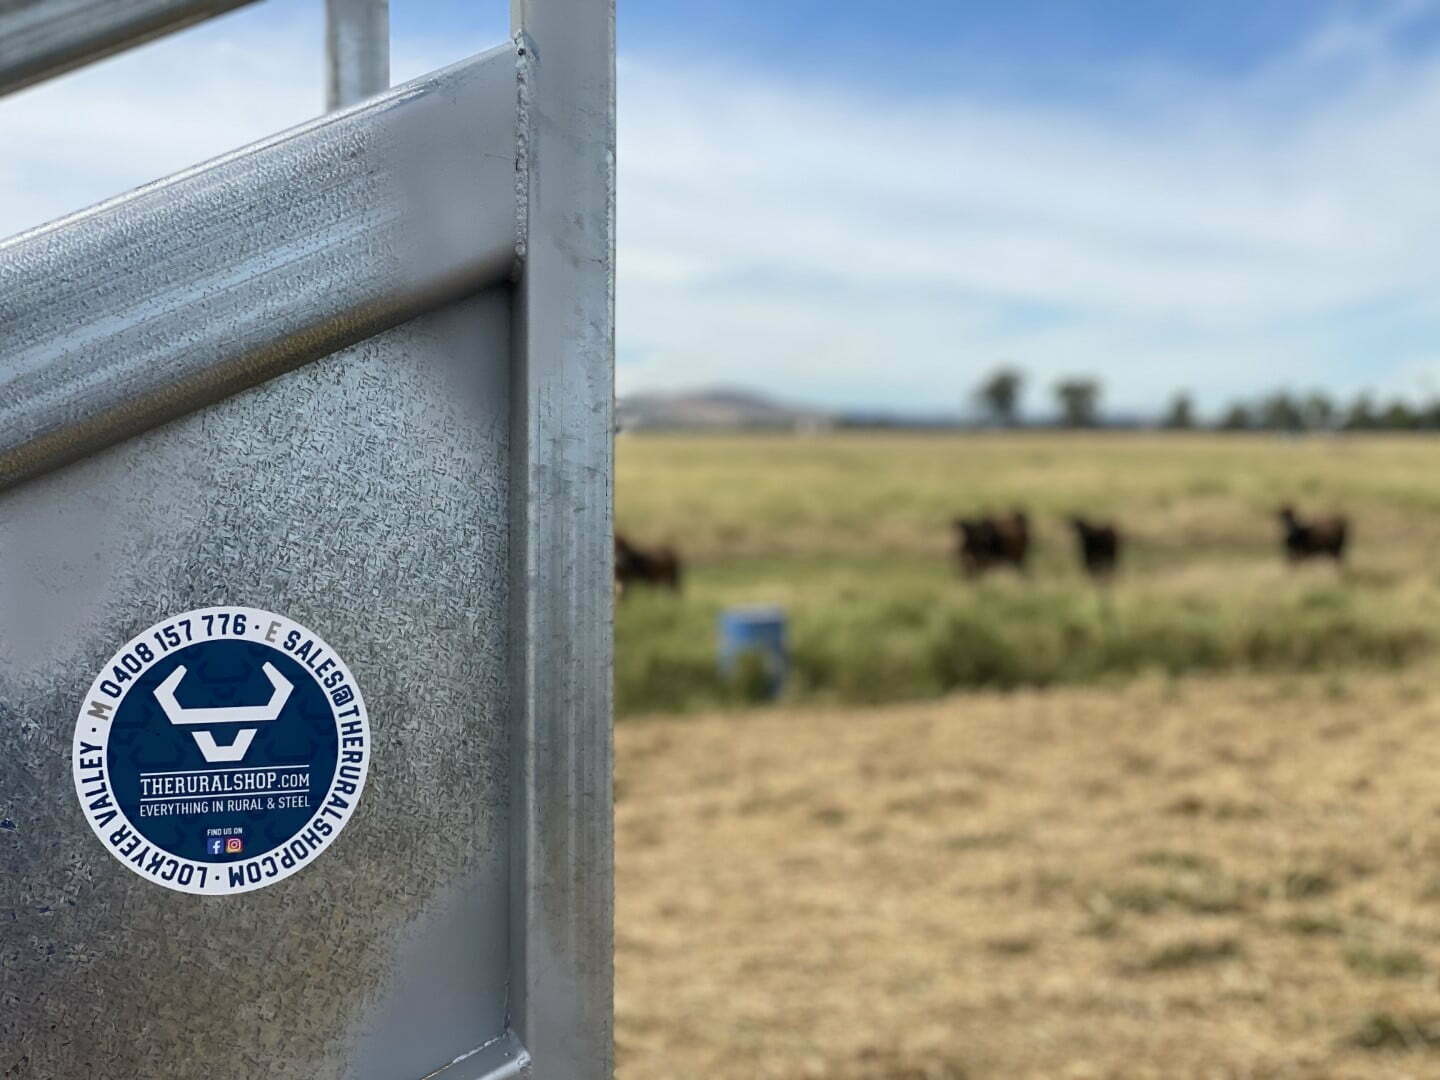 close up image of a cattle loading ramp with the rural shop.com branded sticker